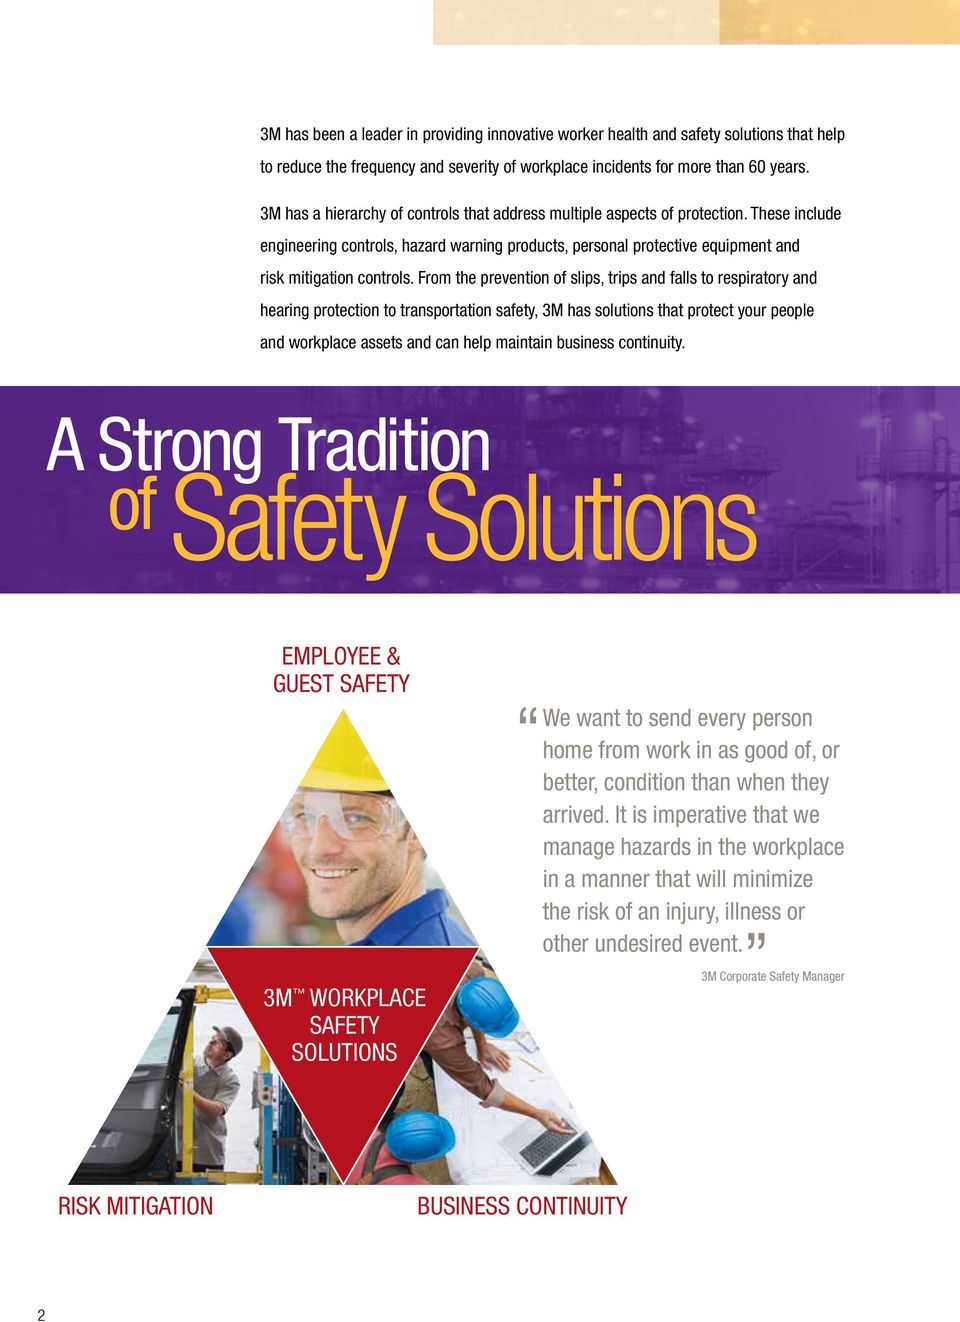 From the prevention of slips, trips and falls to respiratory and hearing protection to transportation safety, 3M has solutions that protect your people and workplace assets and can help maintain